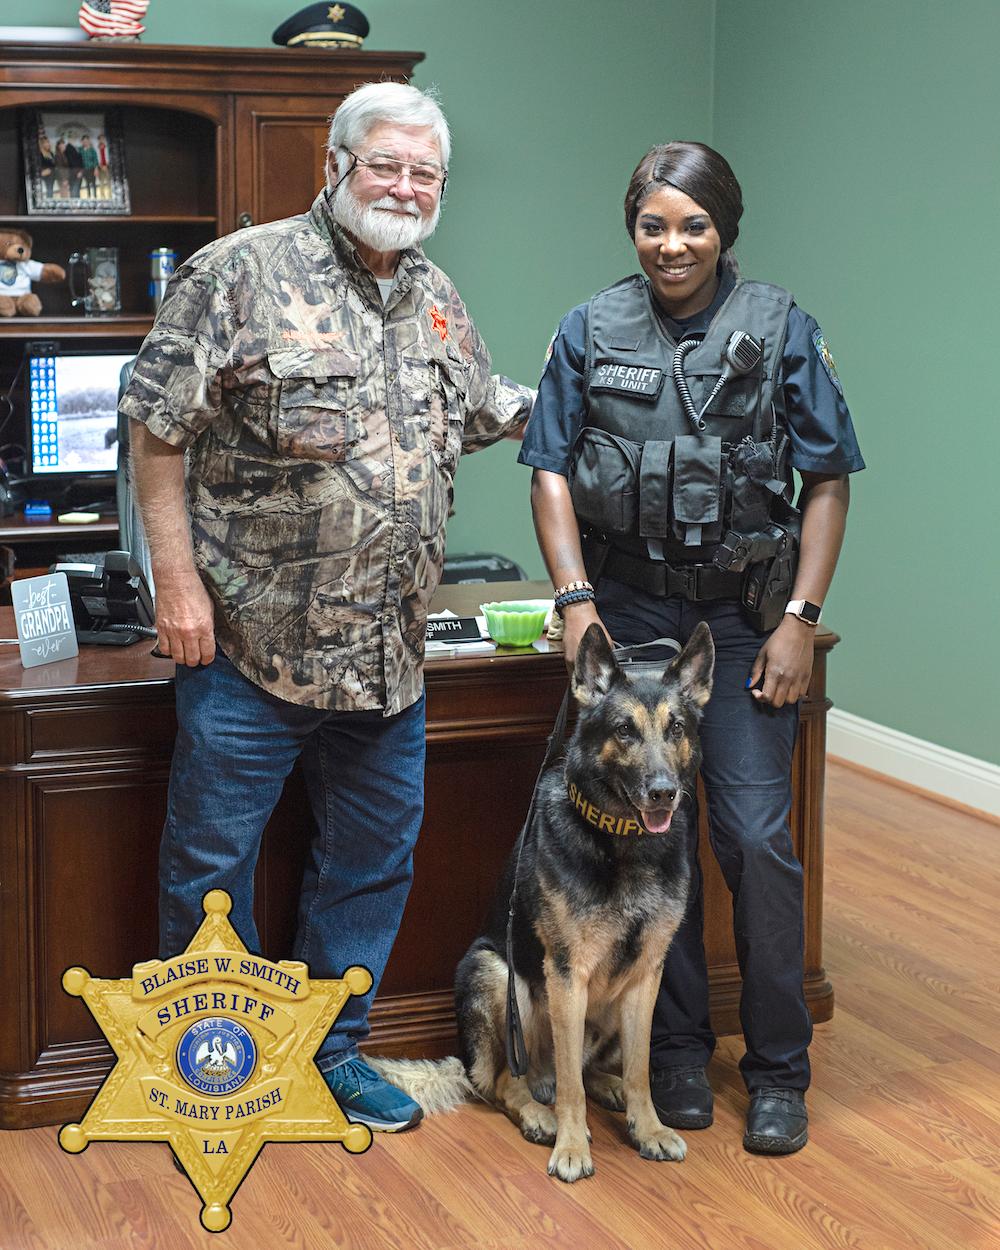 Sheriff Blaise Smith, Deputy Danielle Wilson, and K9 Jace. (<a href="https://www.stmaryso.com/press_view.php?id=1996">St. Mary Parish Sheriff's Office</a>)